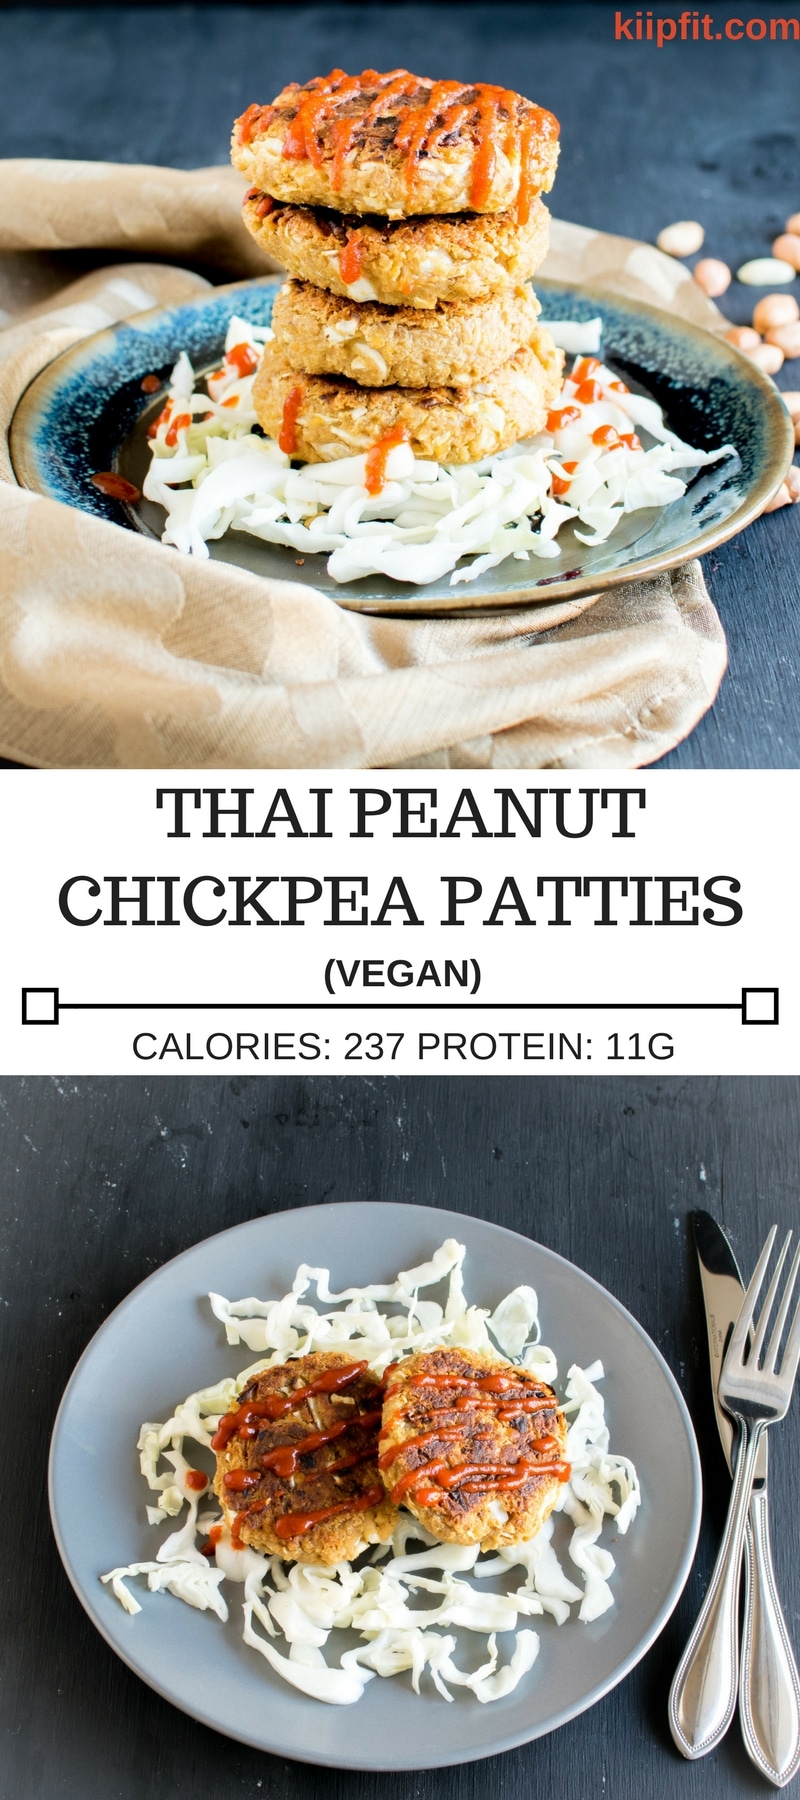 Thai Peanut Chickpea Patties serves as an excellent savory breakfast or for snacking. It’s an outstanding way to start your day by including tons of protein and without any added sugar [ v + gf ] kiipfit.com